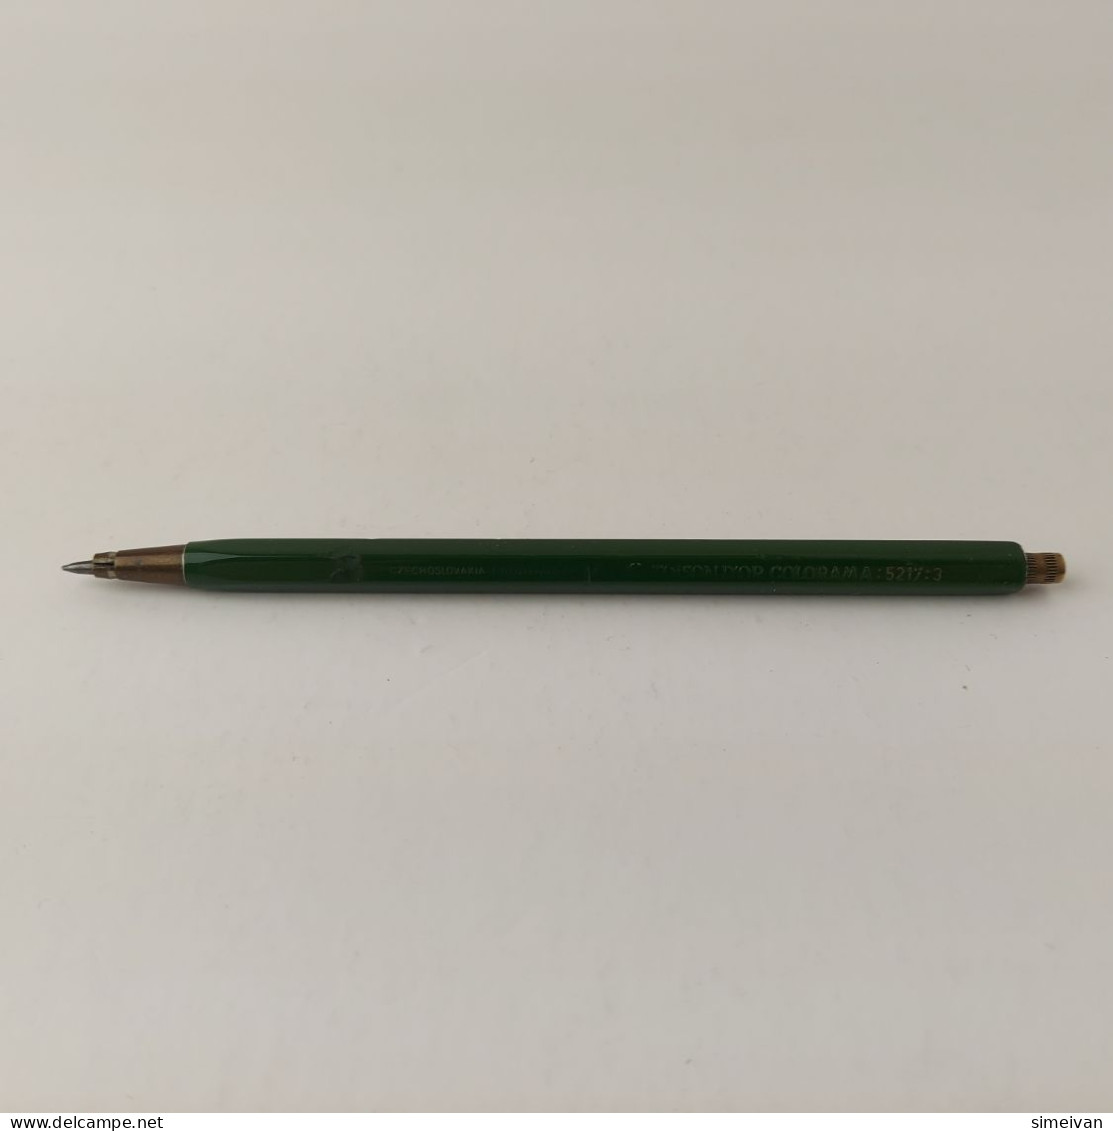 Vintage Mechanical Pencil TOISON D'OR COLORAMA 5217:3 Bohemia Works Green #5492 - Vulpen